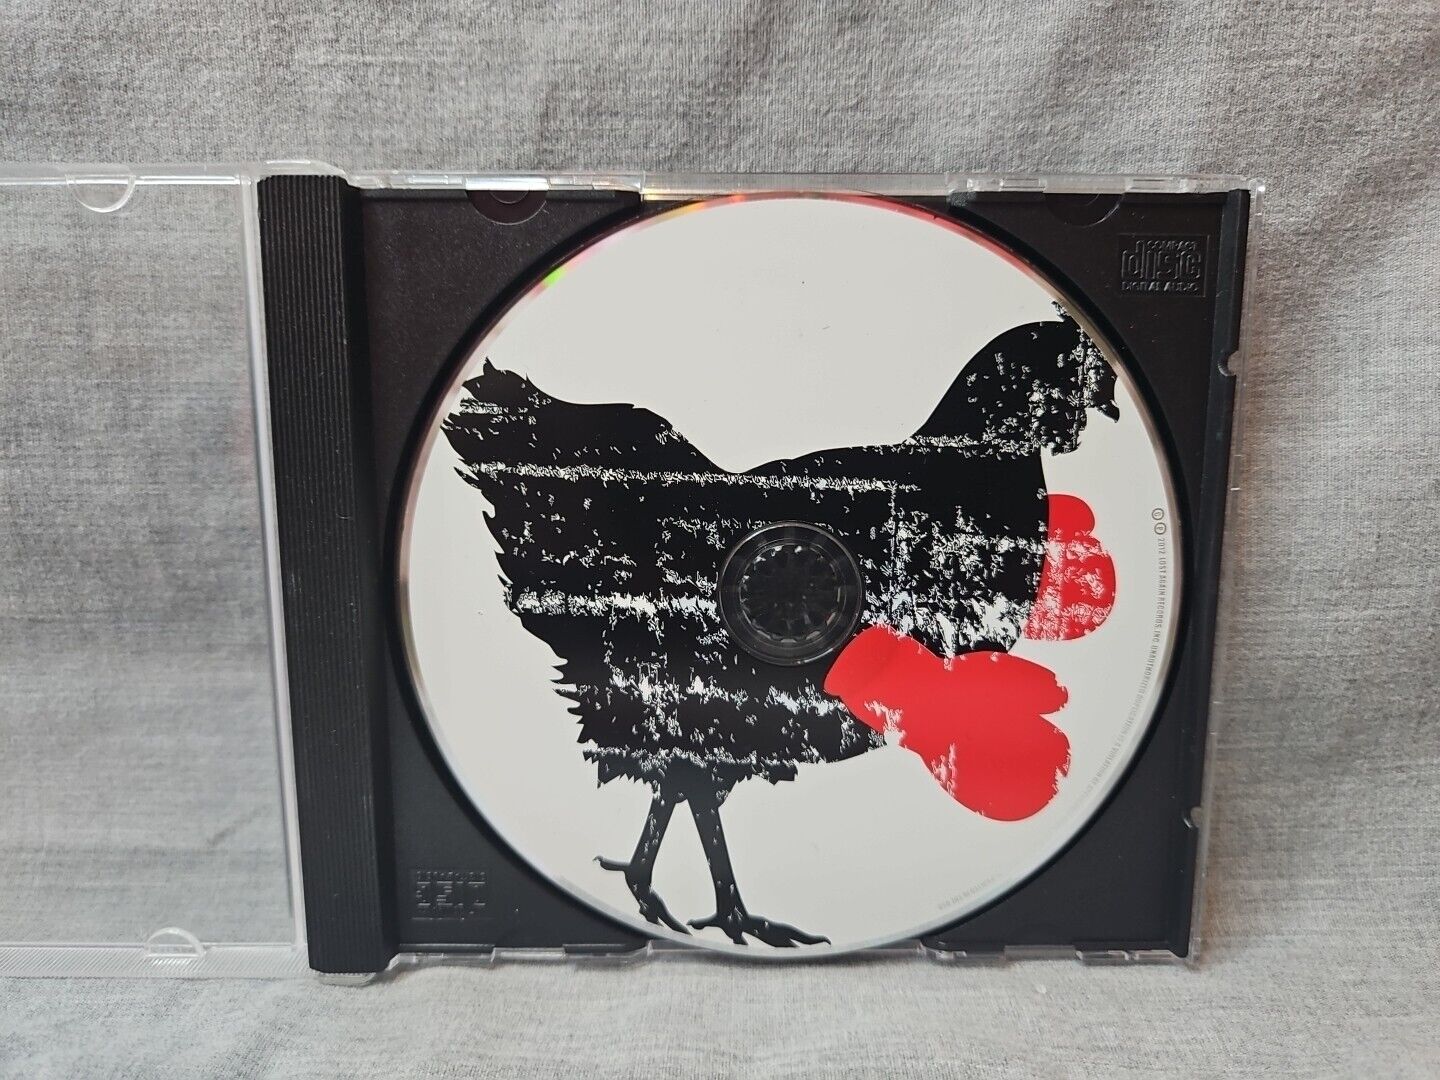 Chicken Boxer by Gaelic Storm (CD, 2012, Lost Again Records) Disc Only